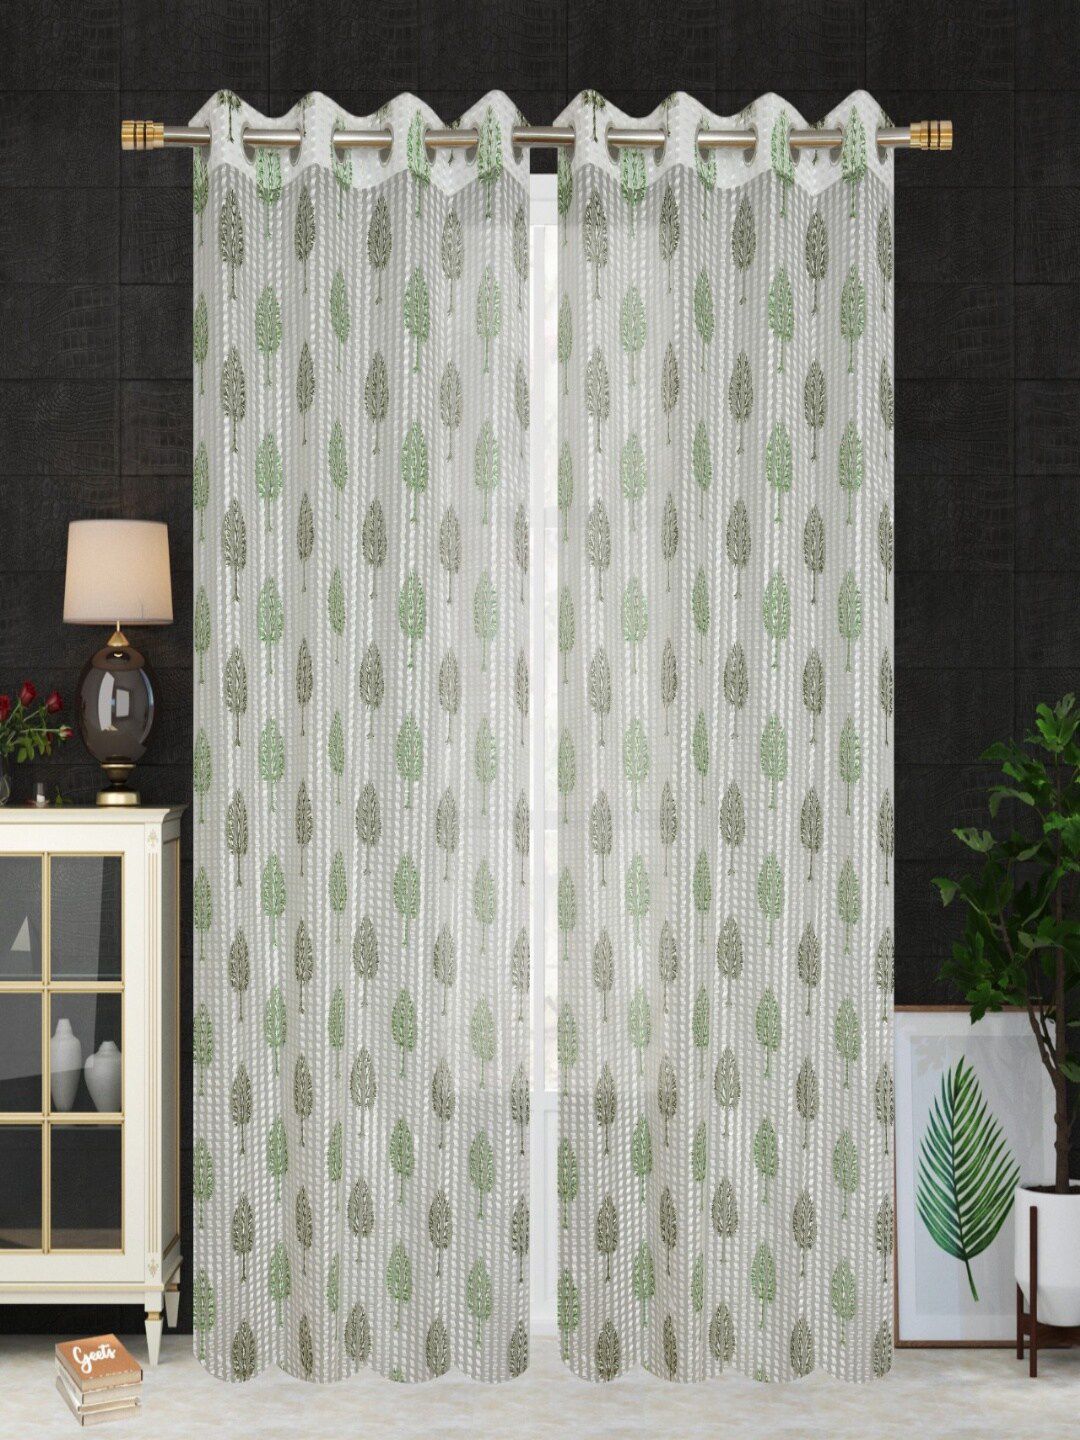 Homefab India White & Green Set of 2 Ethnic Motifs Sheer Door Curtains Price in India